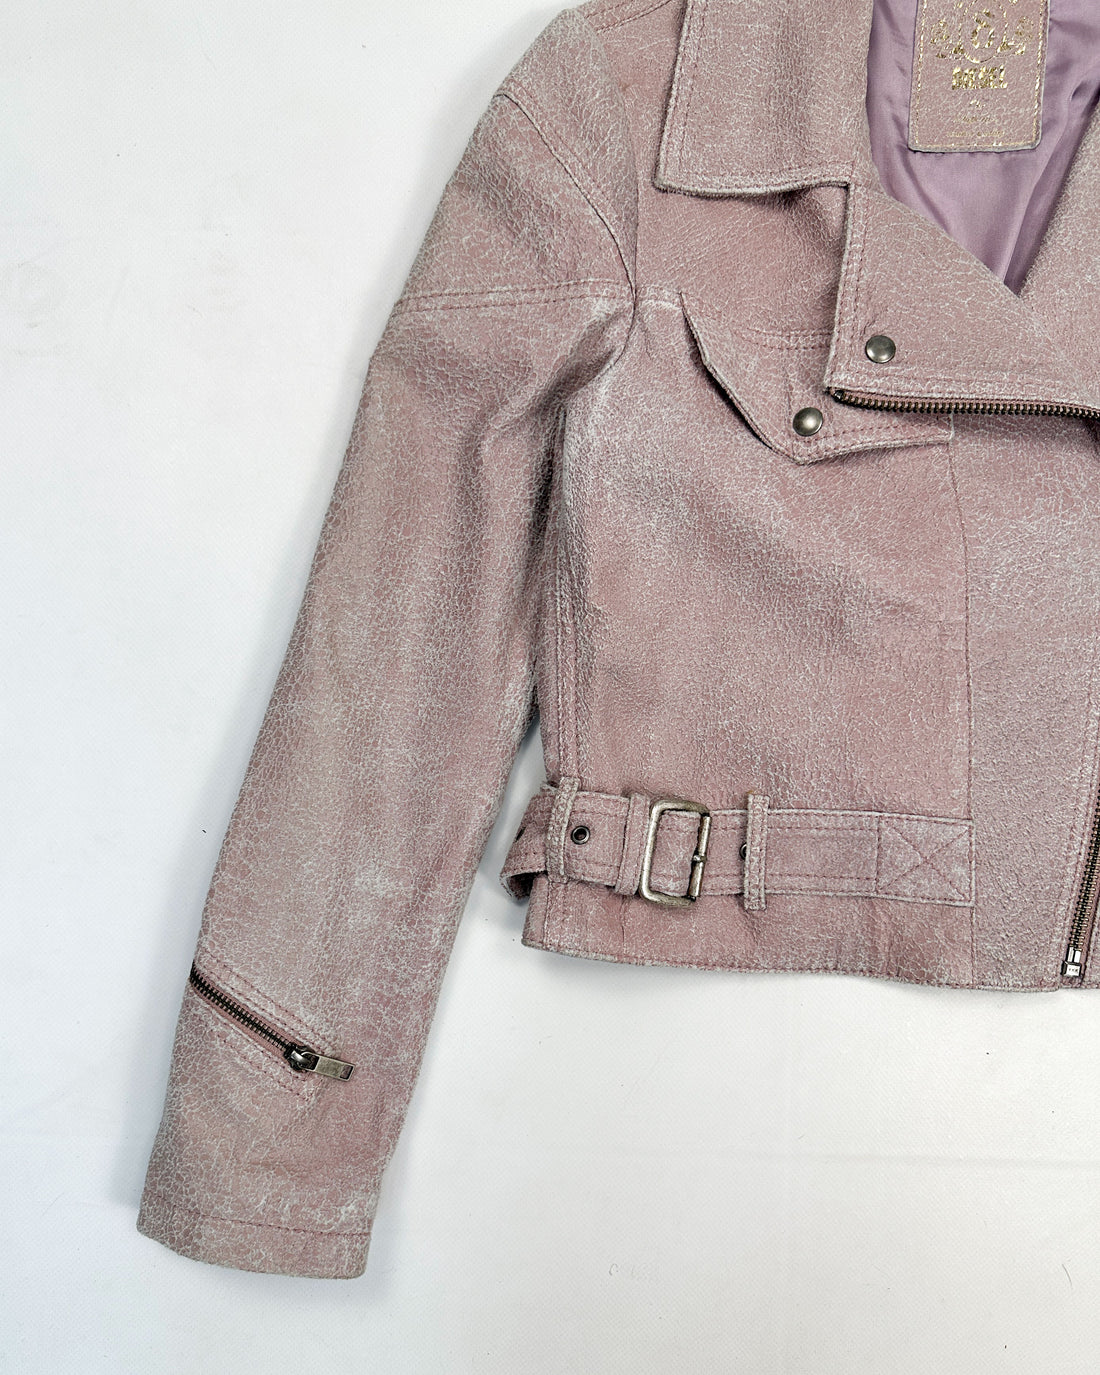 Diesel Distressed Pink Leather Copped Jacket 1990's